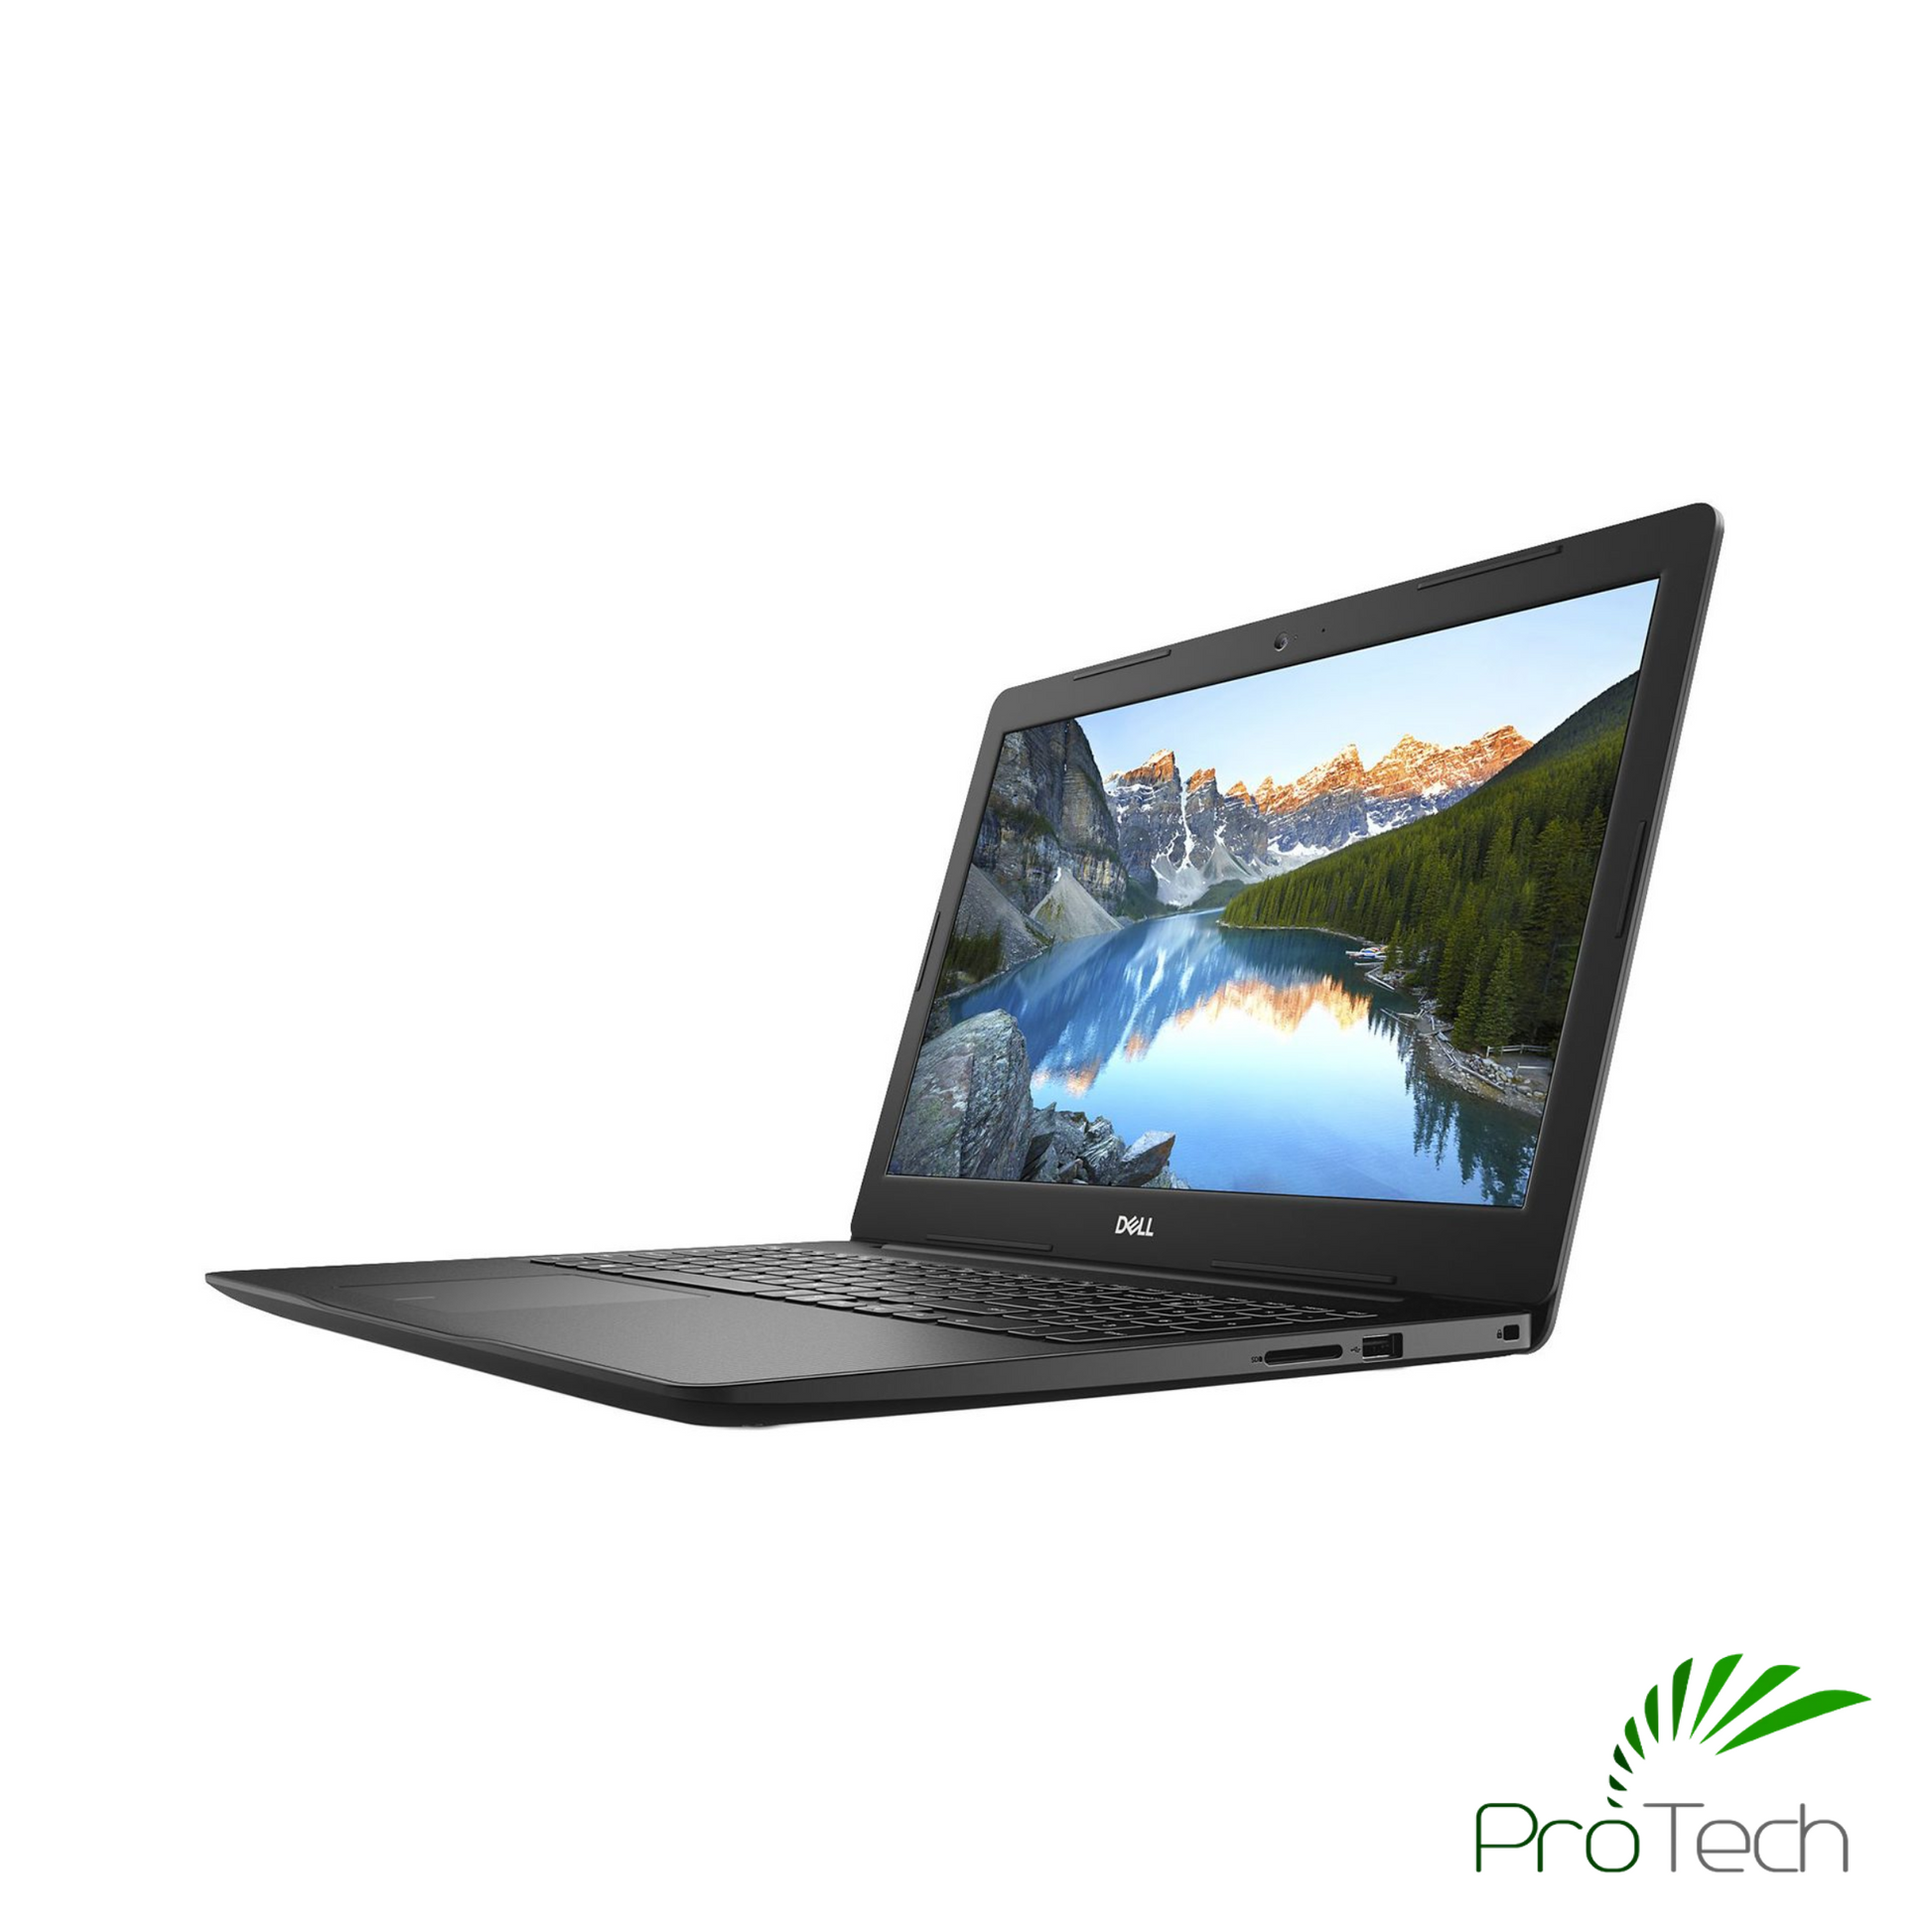 Dell Inspiron 3595 15" | AMD A6 | 16GB RAM | 512GB SSD ProTech I.T. Solutions